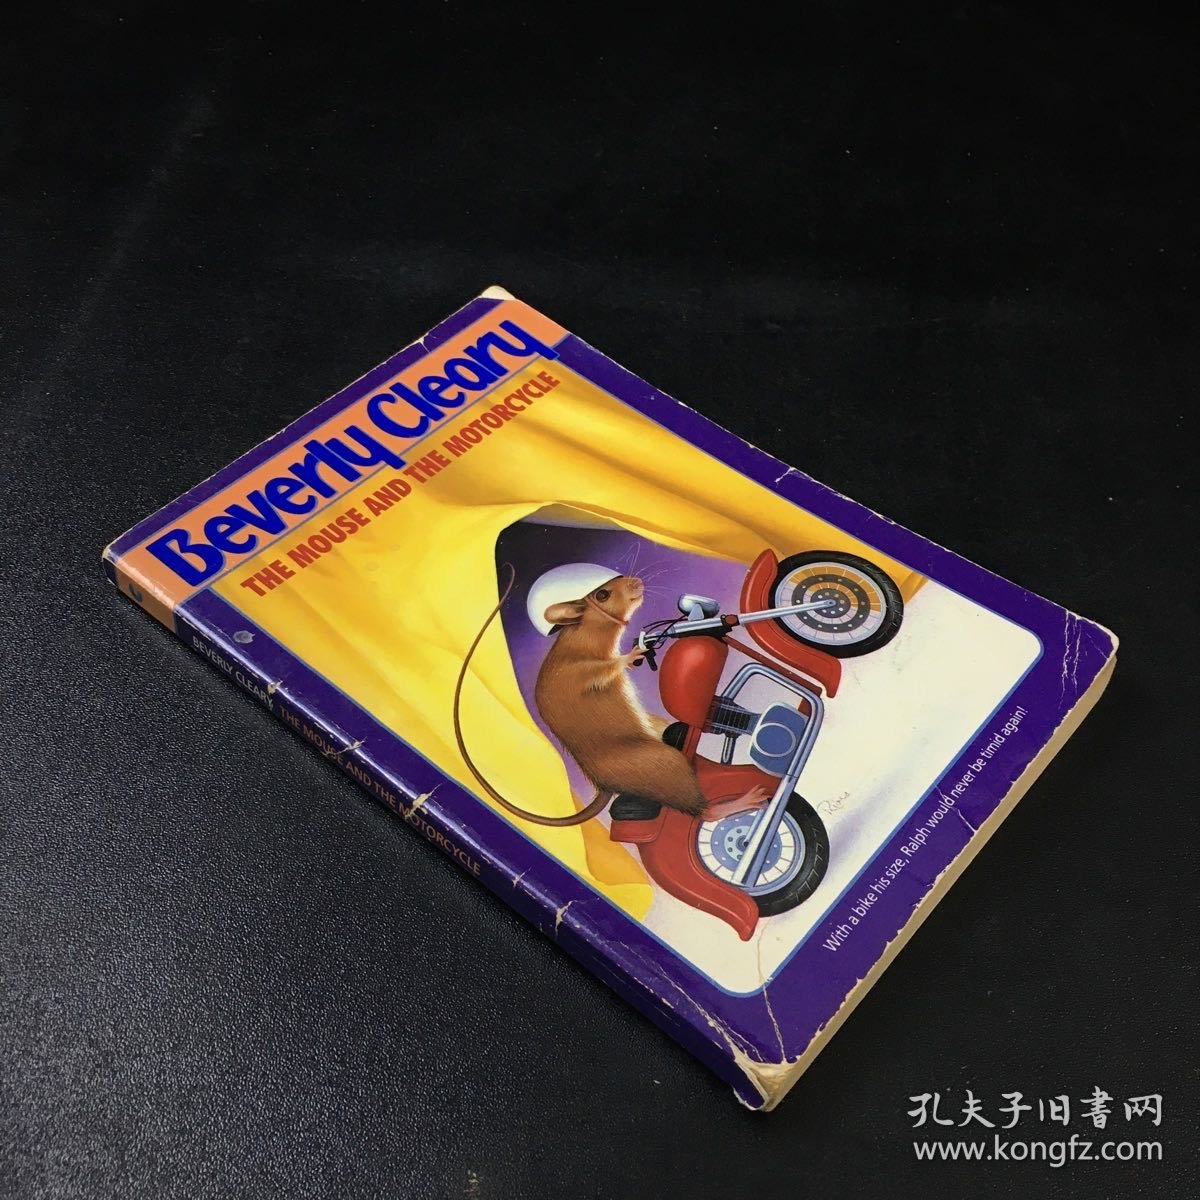 Beverly Cleary THE MOUSE AND THE MOTORCYCLE【贝弗利·克利里老鼠和摩托车】【书脊封面有伤，封底折痕】